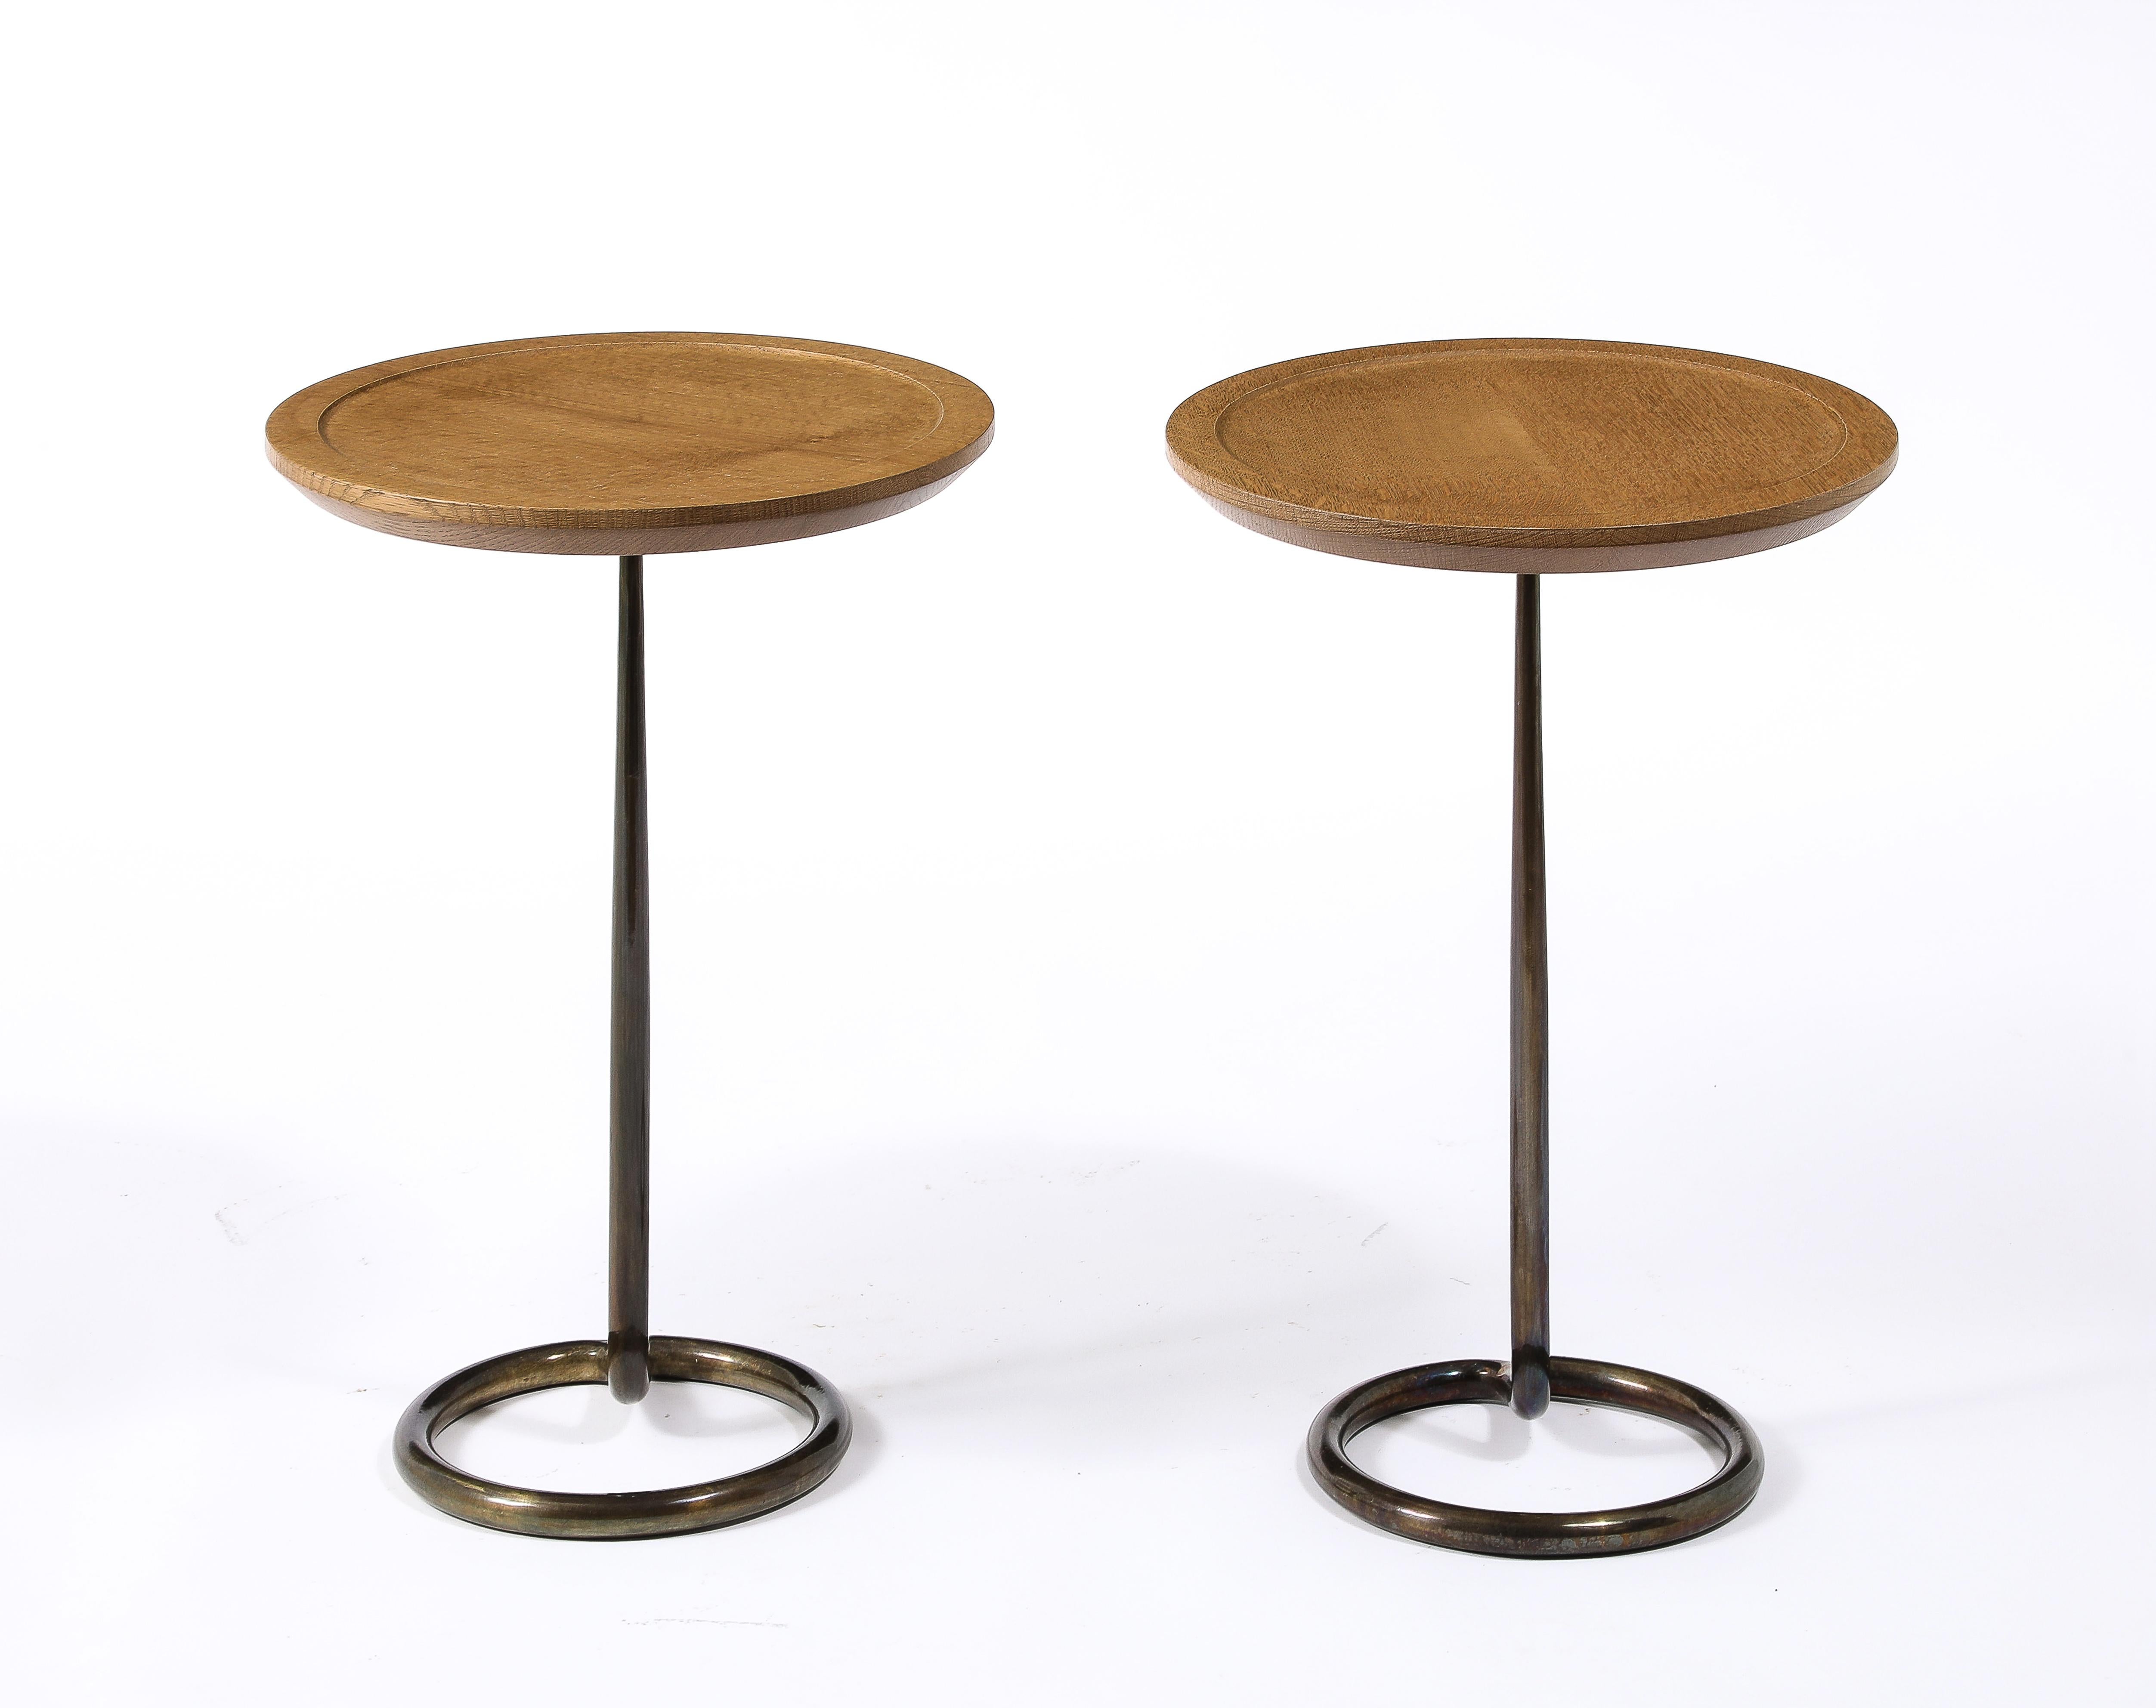 Elegant drink tables or side tables by René Herbst for Stablet, Brass stem with a carved oak top.